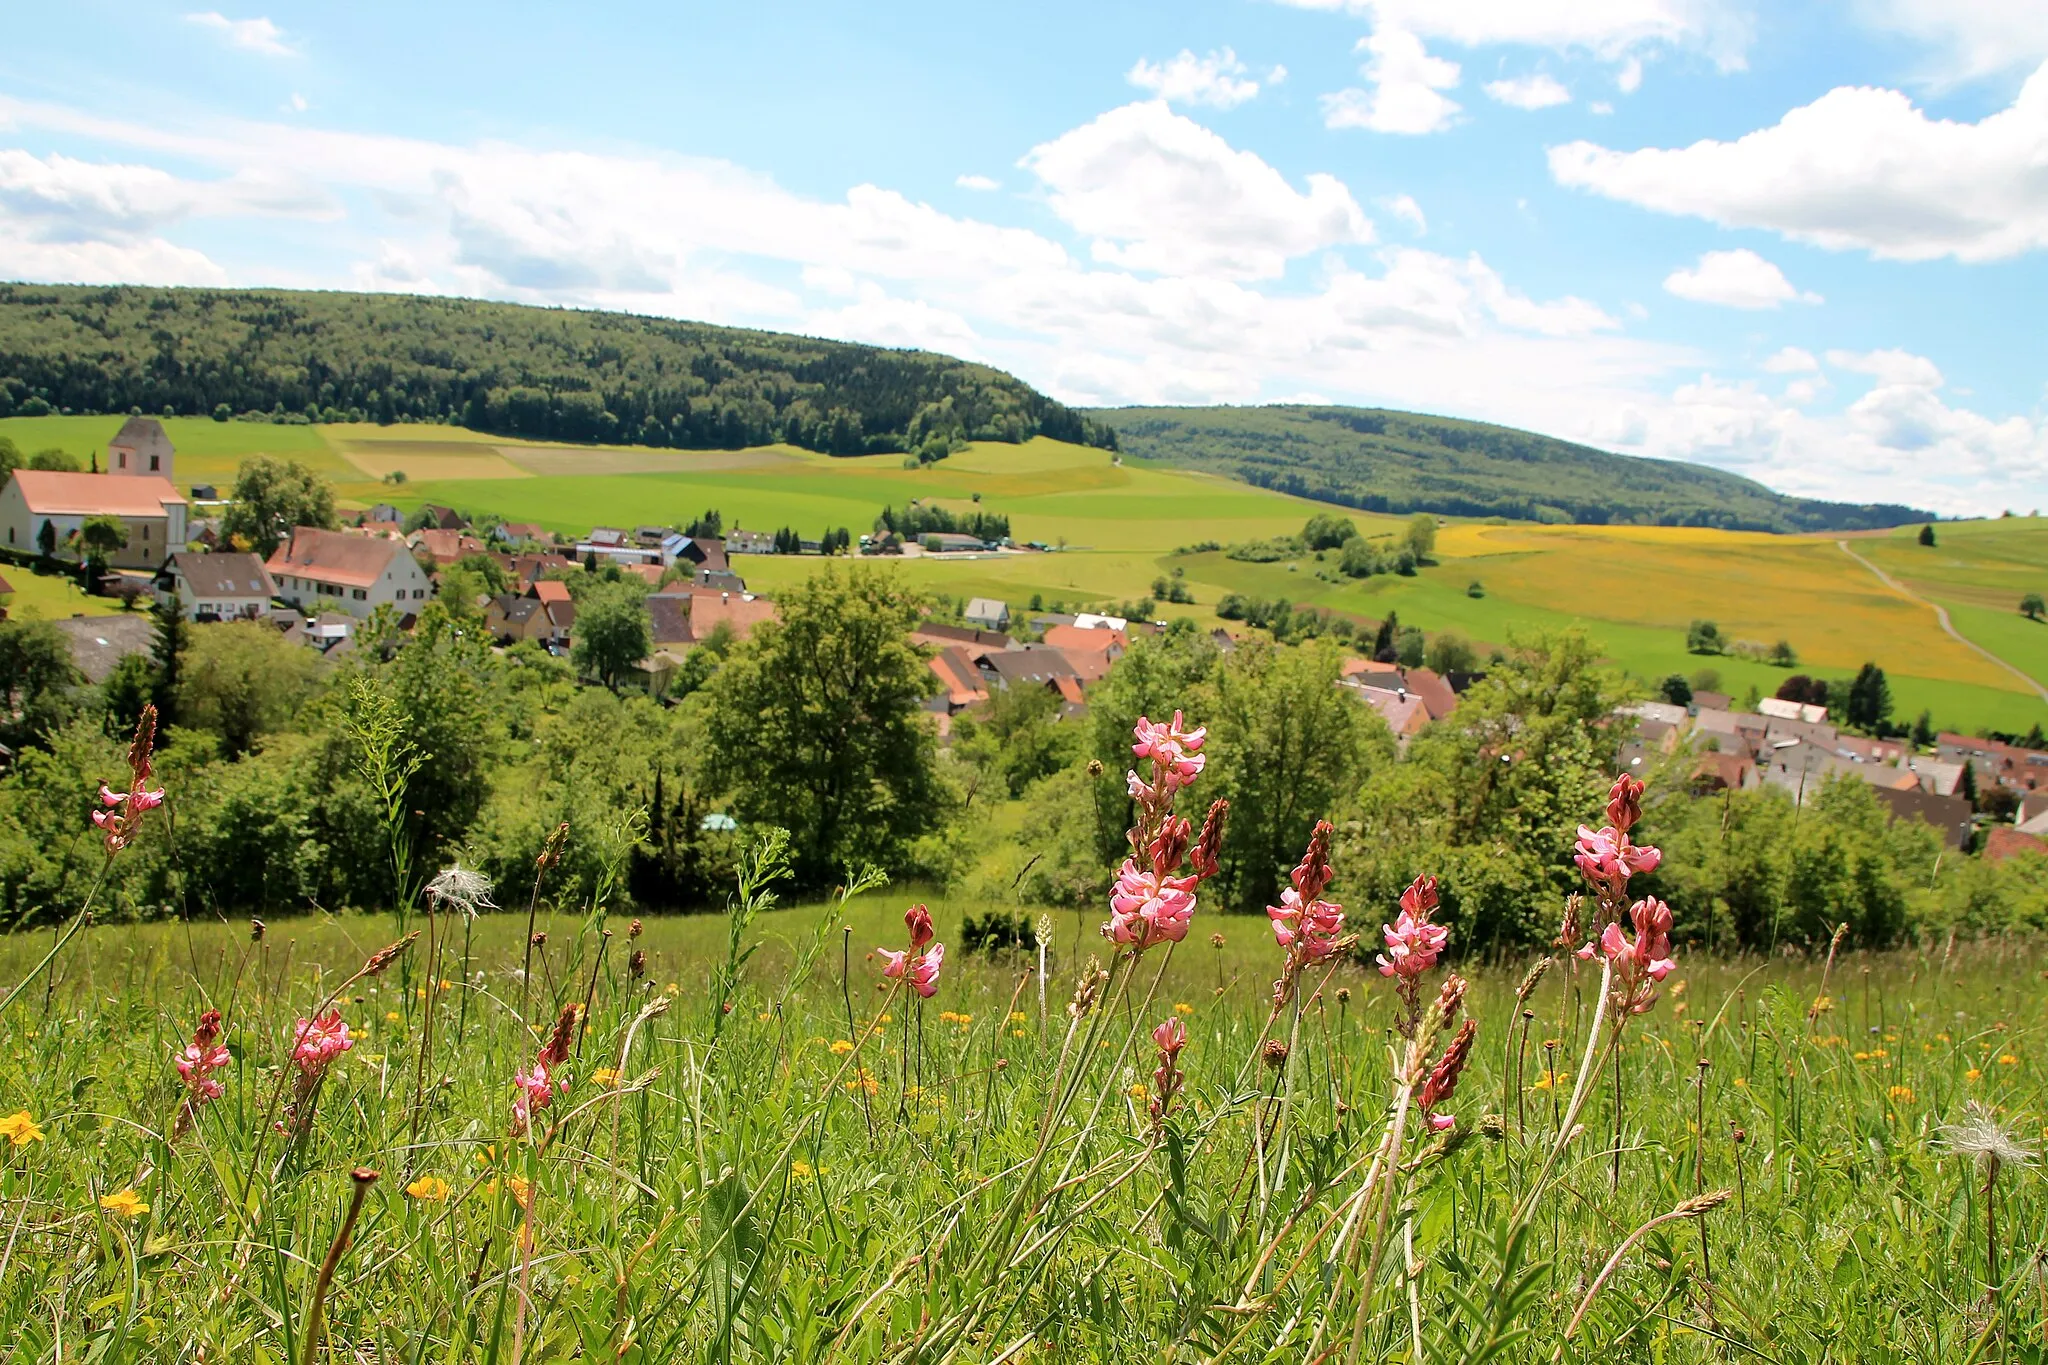 Photo showing: Typical flora in the natural reserve "Hondinger Zisiberg" in Baden-Württemberg, Germany. The village "Hondingen" is in the background.